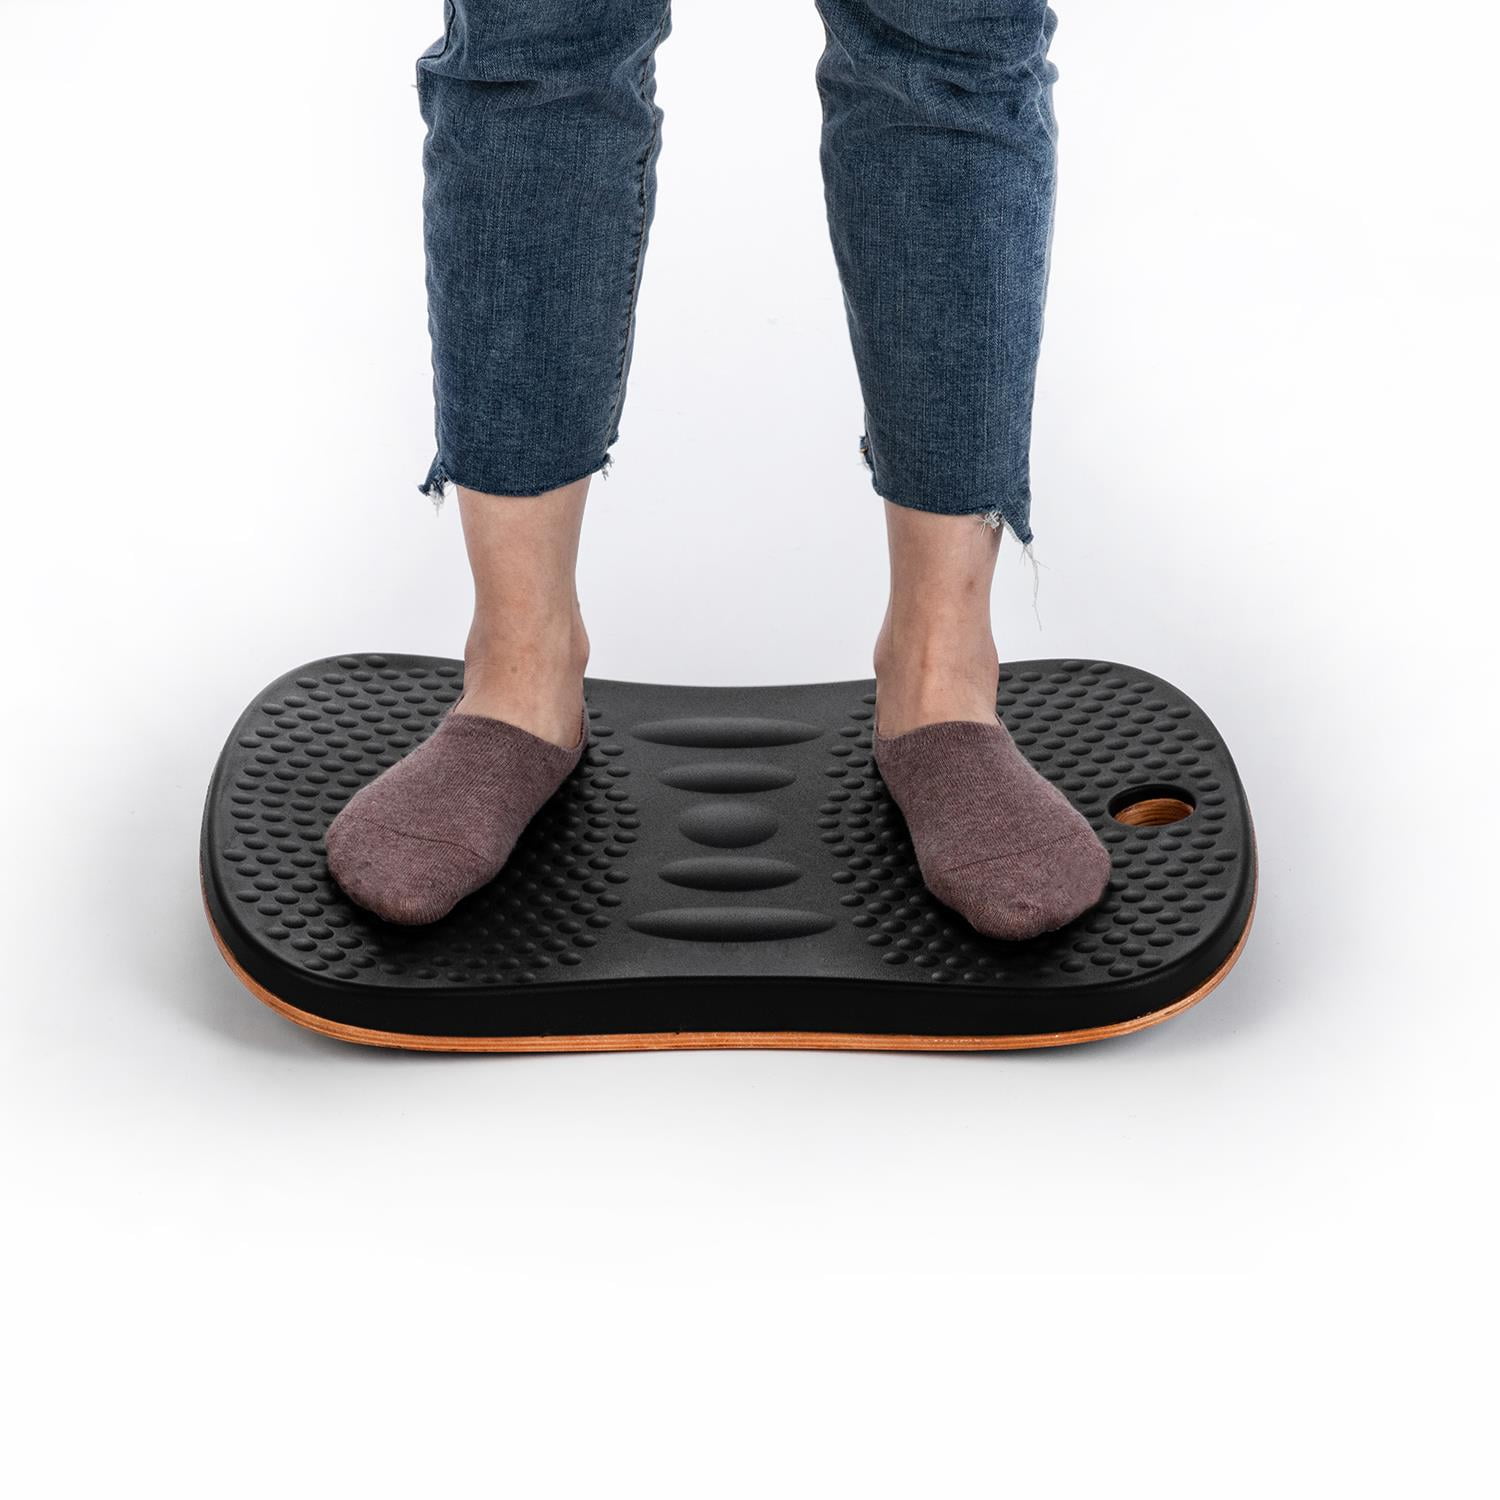 Wobble Board bamboo+aluminum balance stability trainer for standing desk fitness 